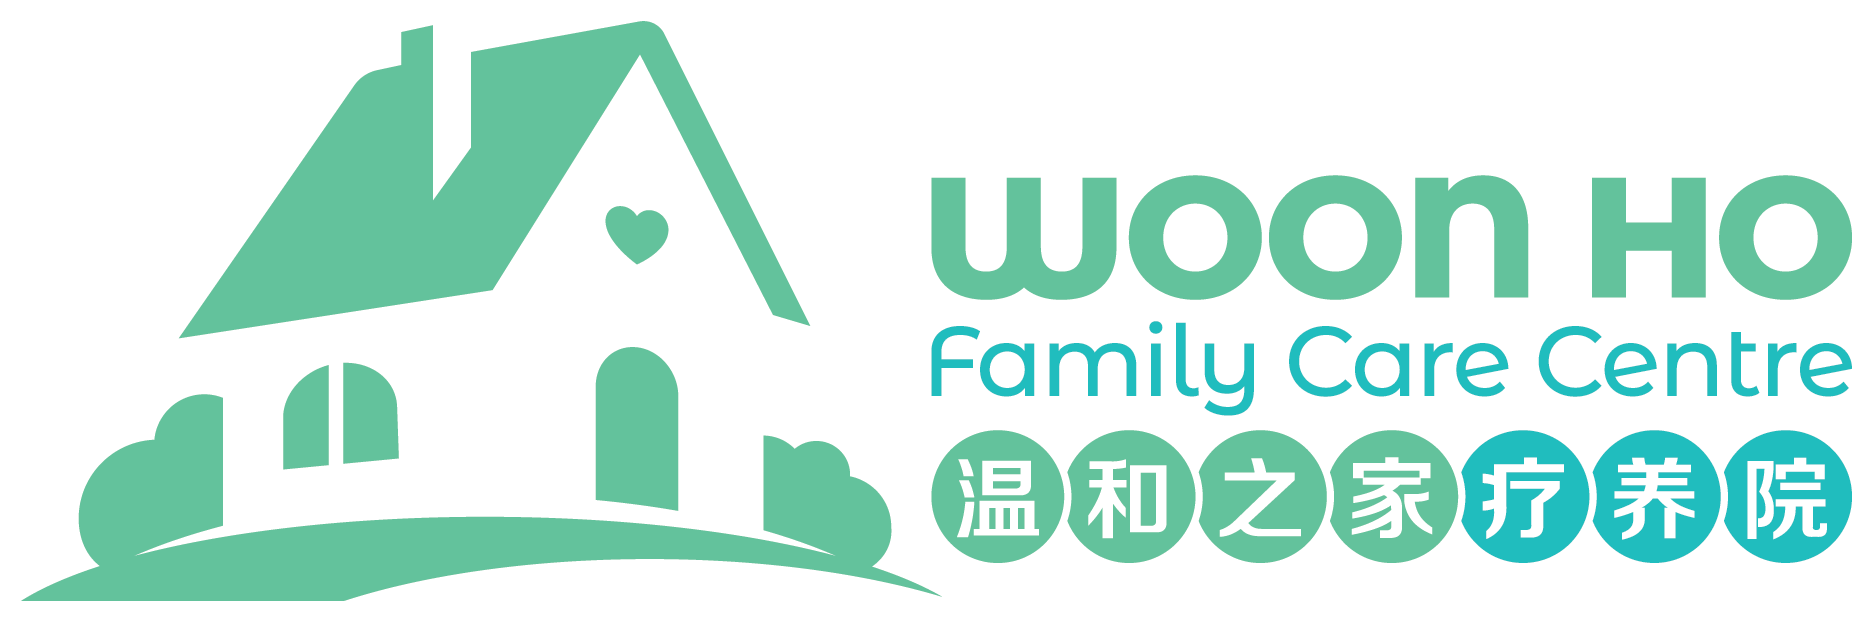 Woon Ho Family Care Centre